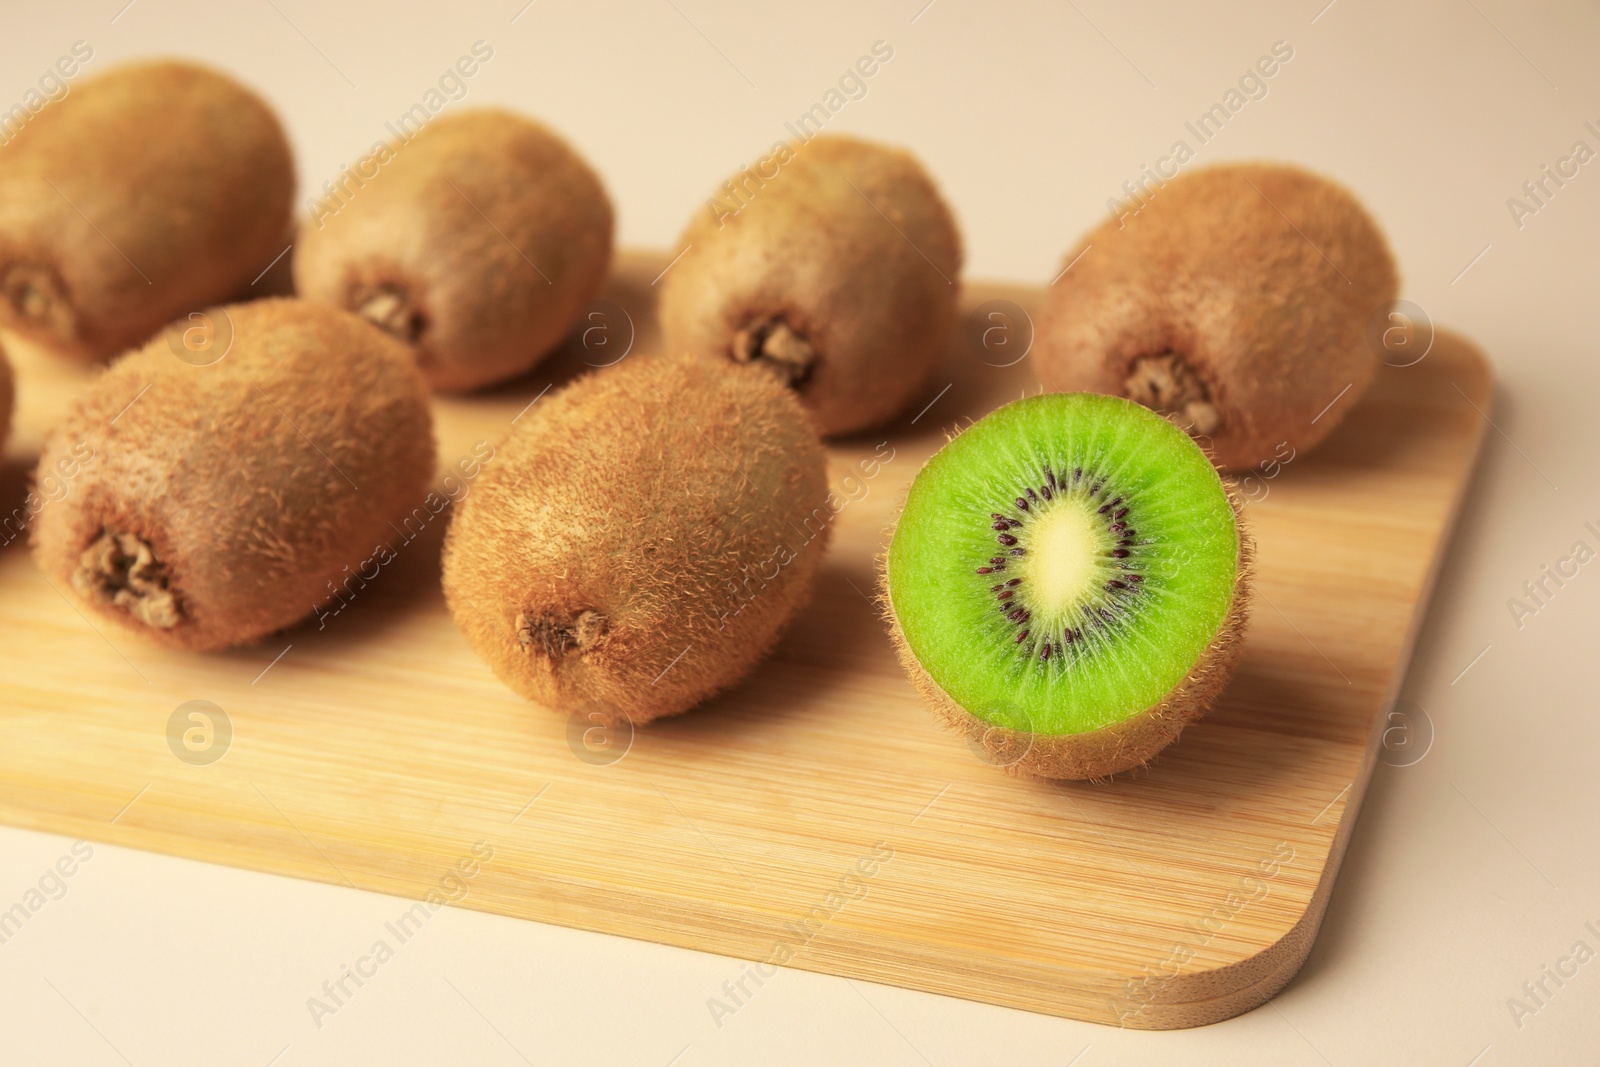 Photo of Wooden board with whole kiwis and cut one on beige background, closeup